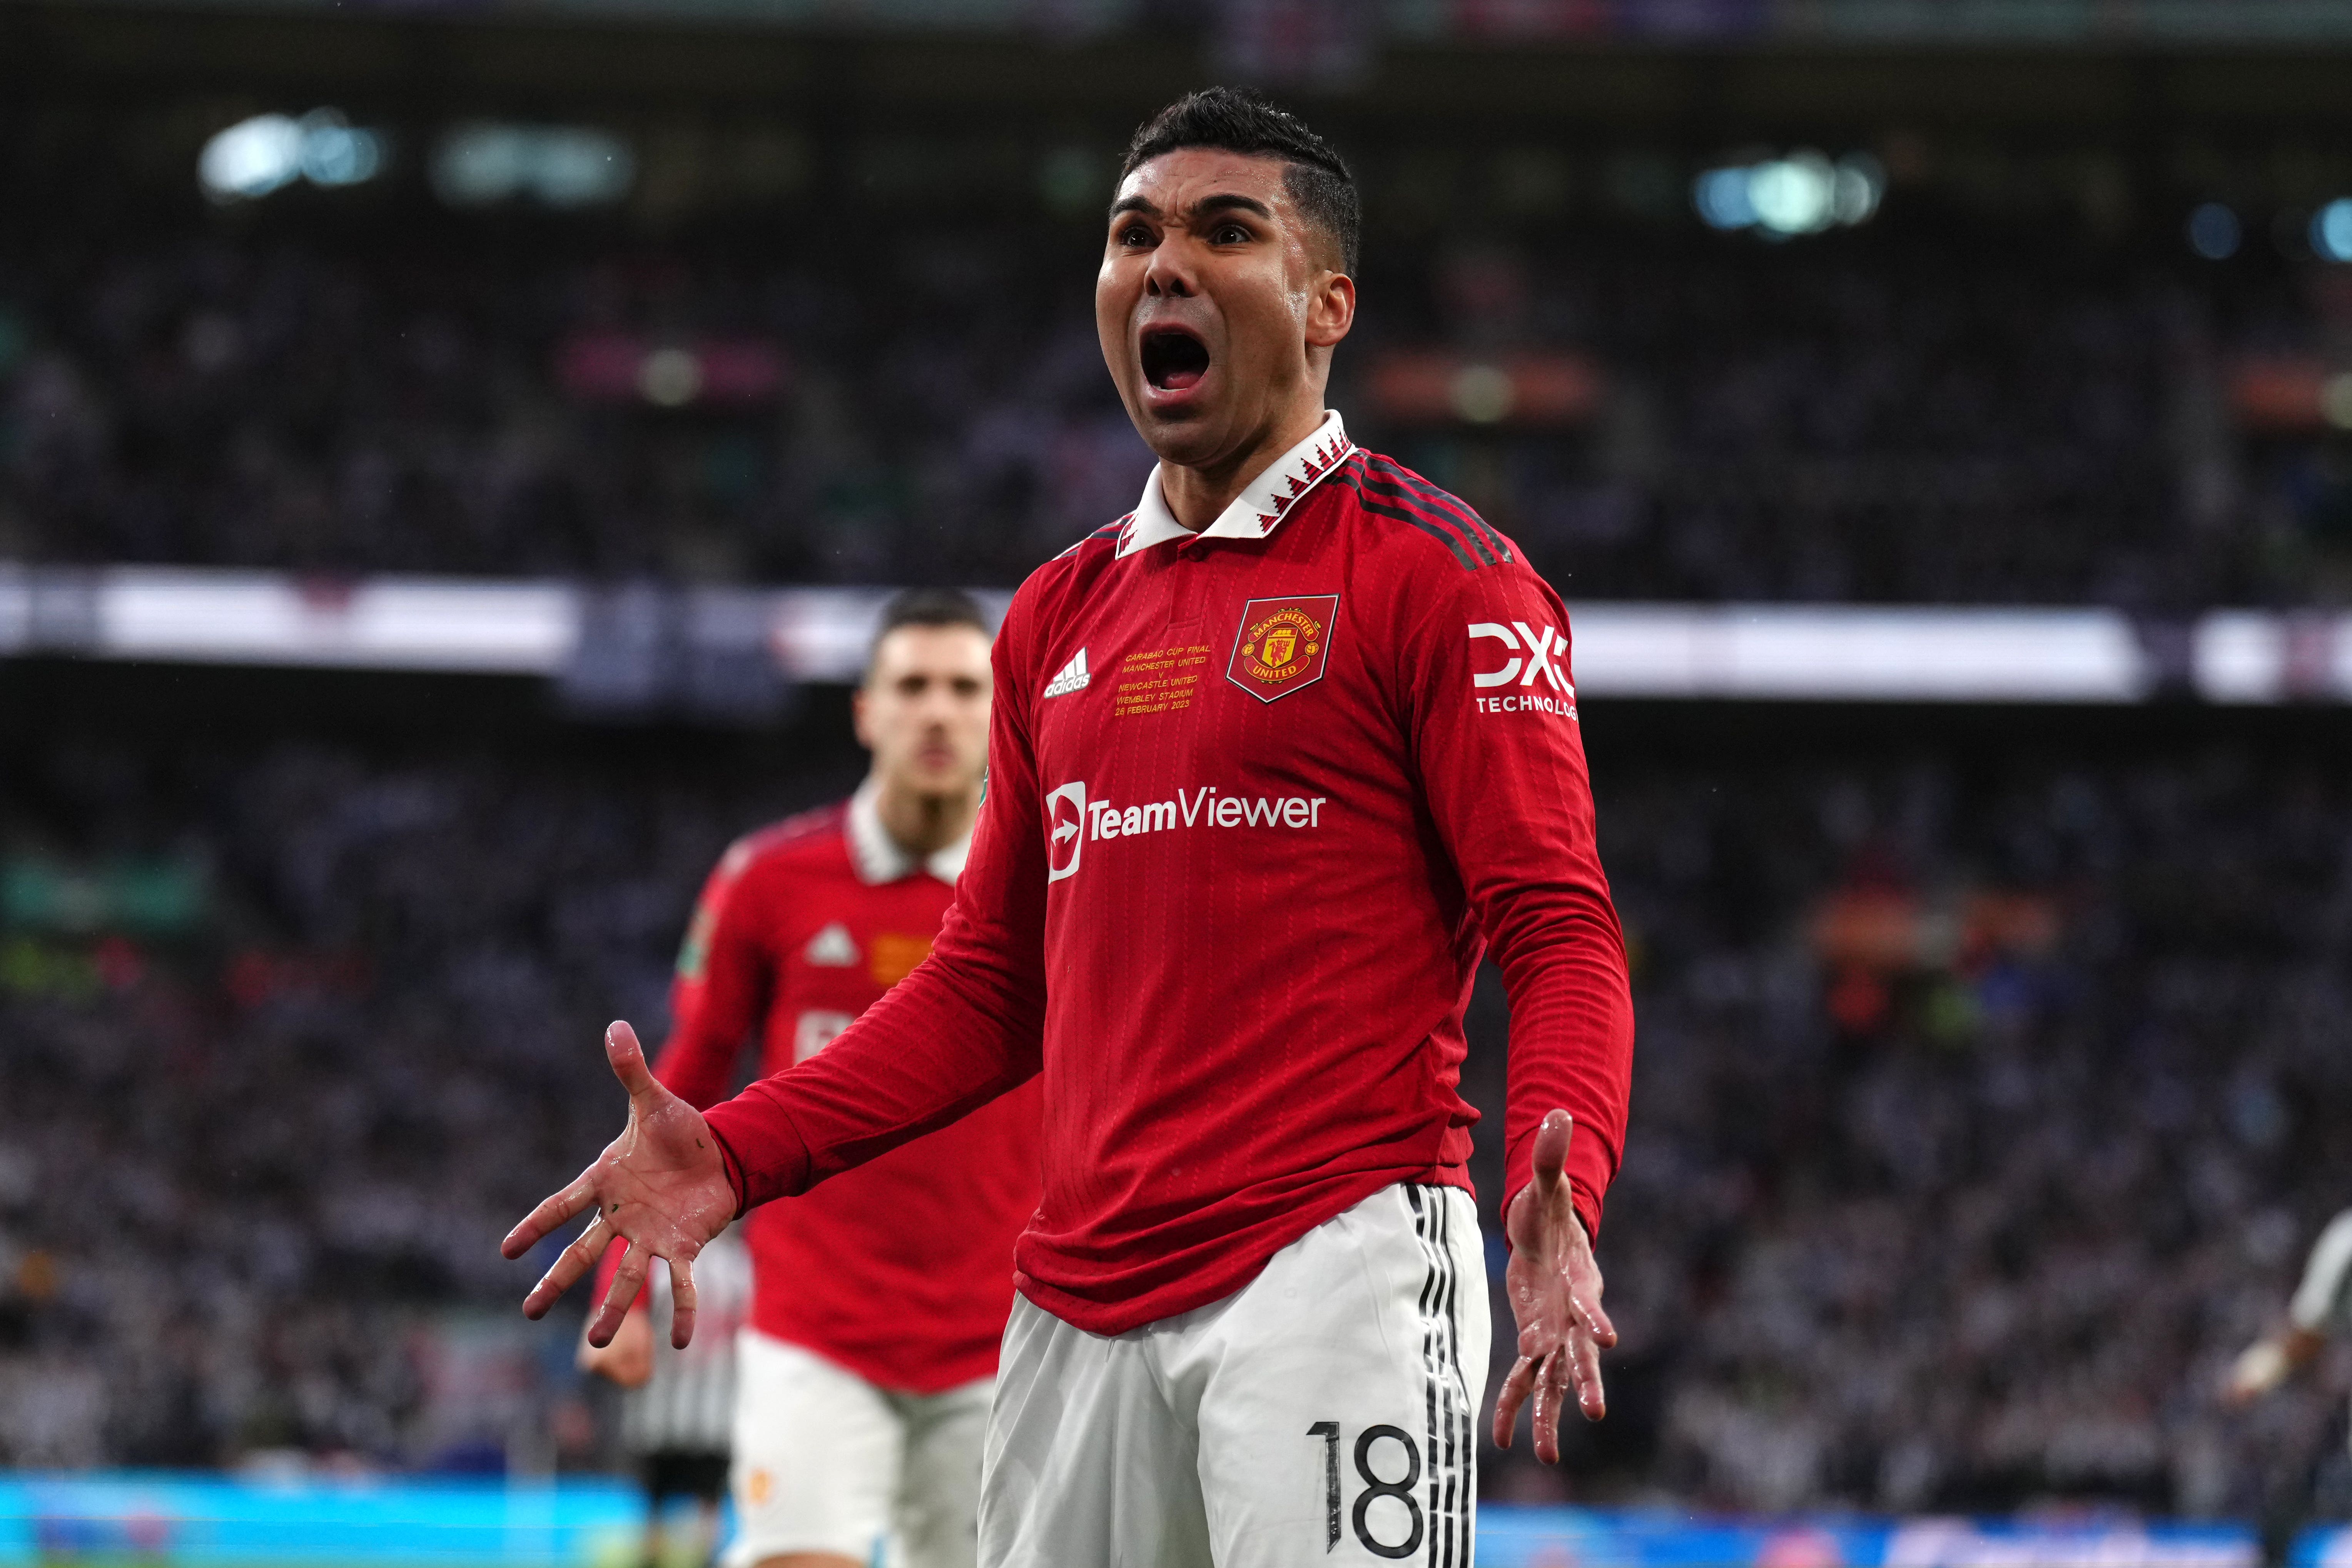 Casemiro opened the scoring during an excellent display